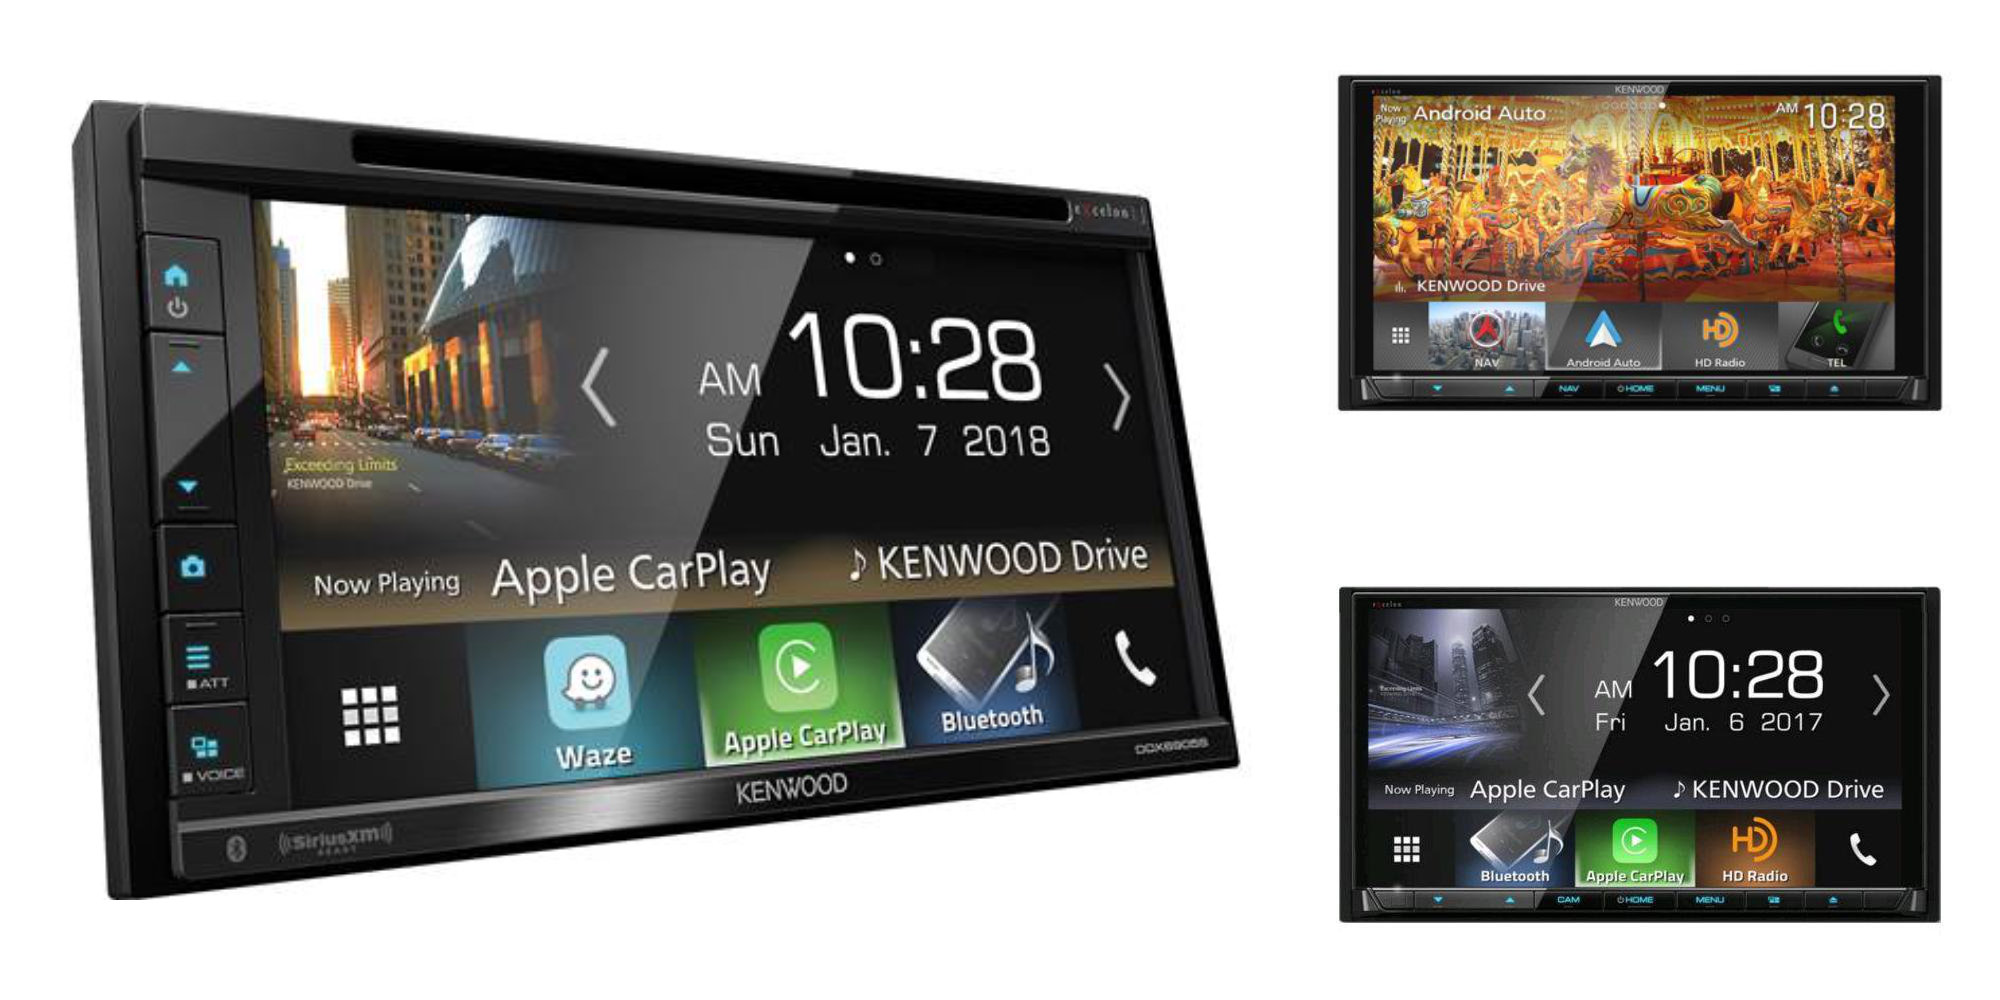 Upgrade to Apple CarPlay or Android Auto for $100 with this